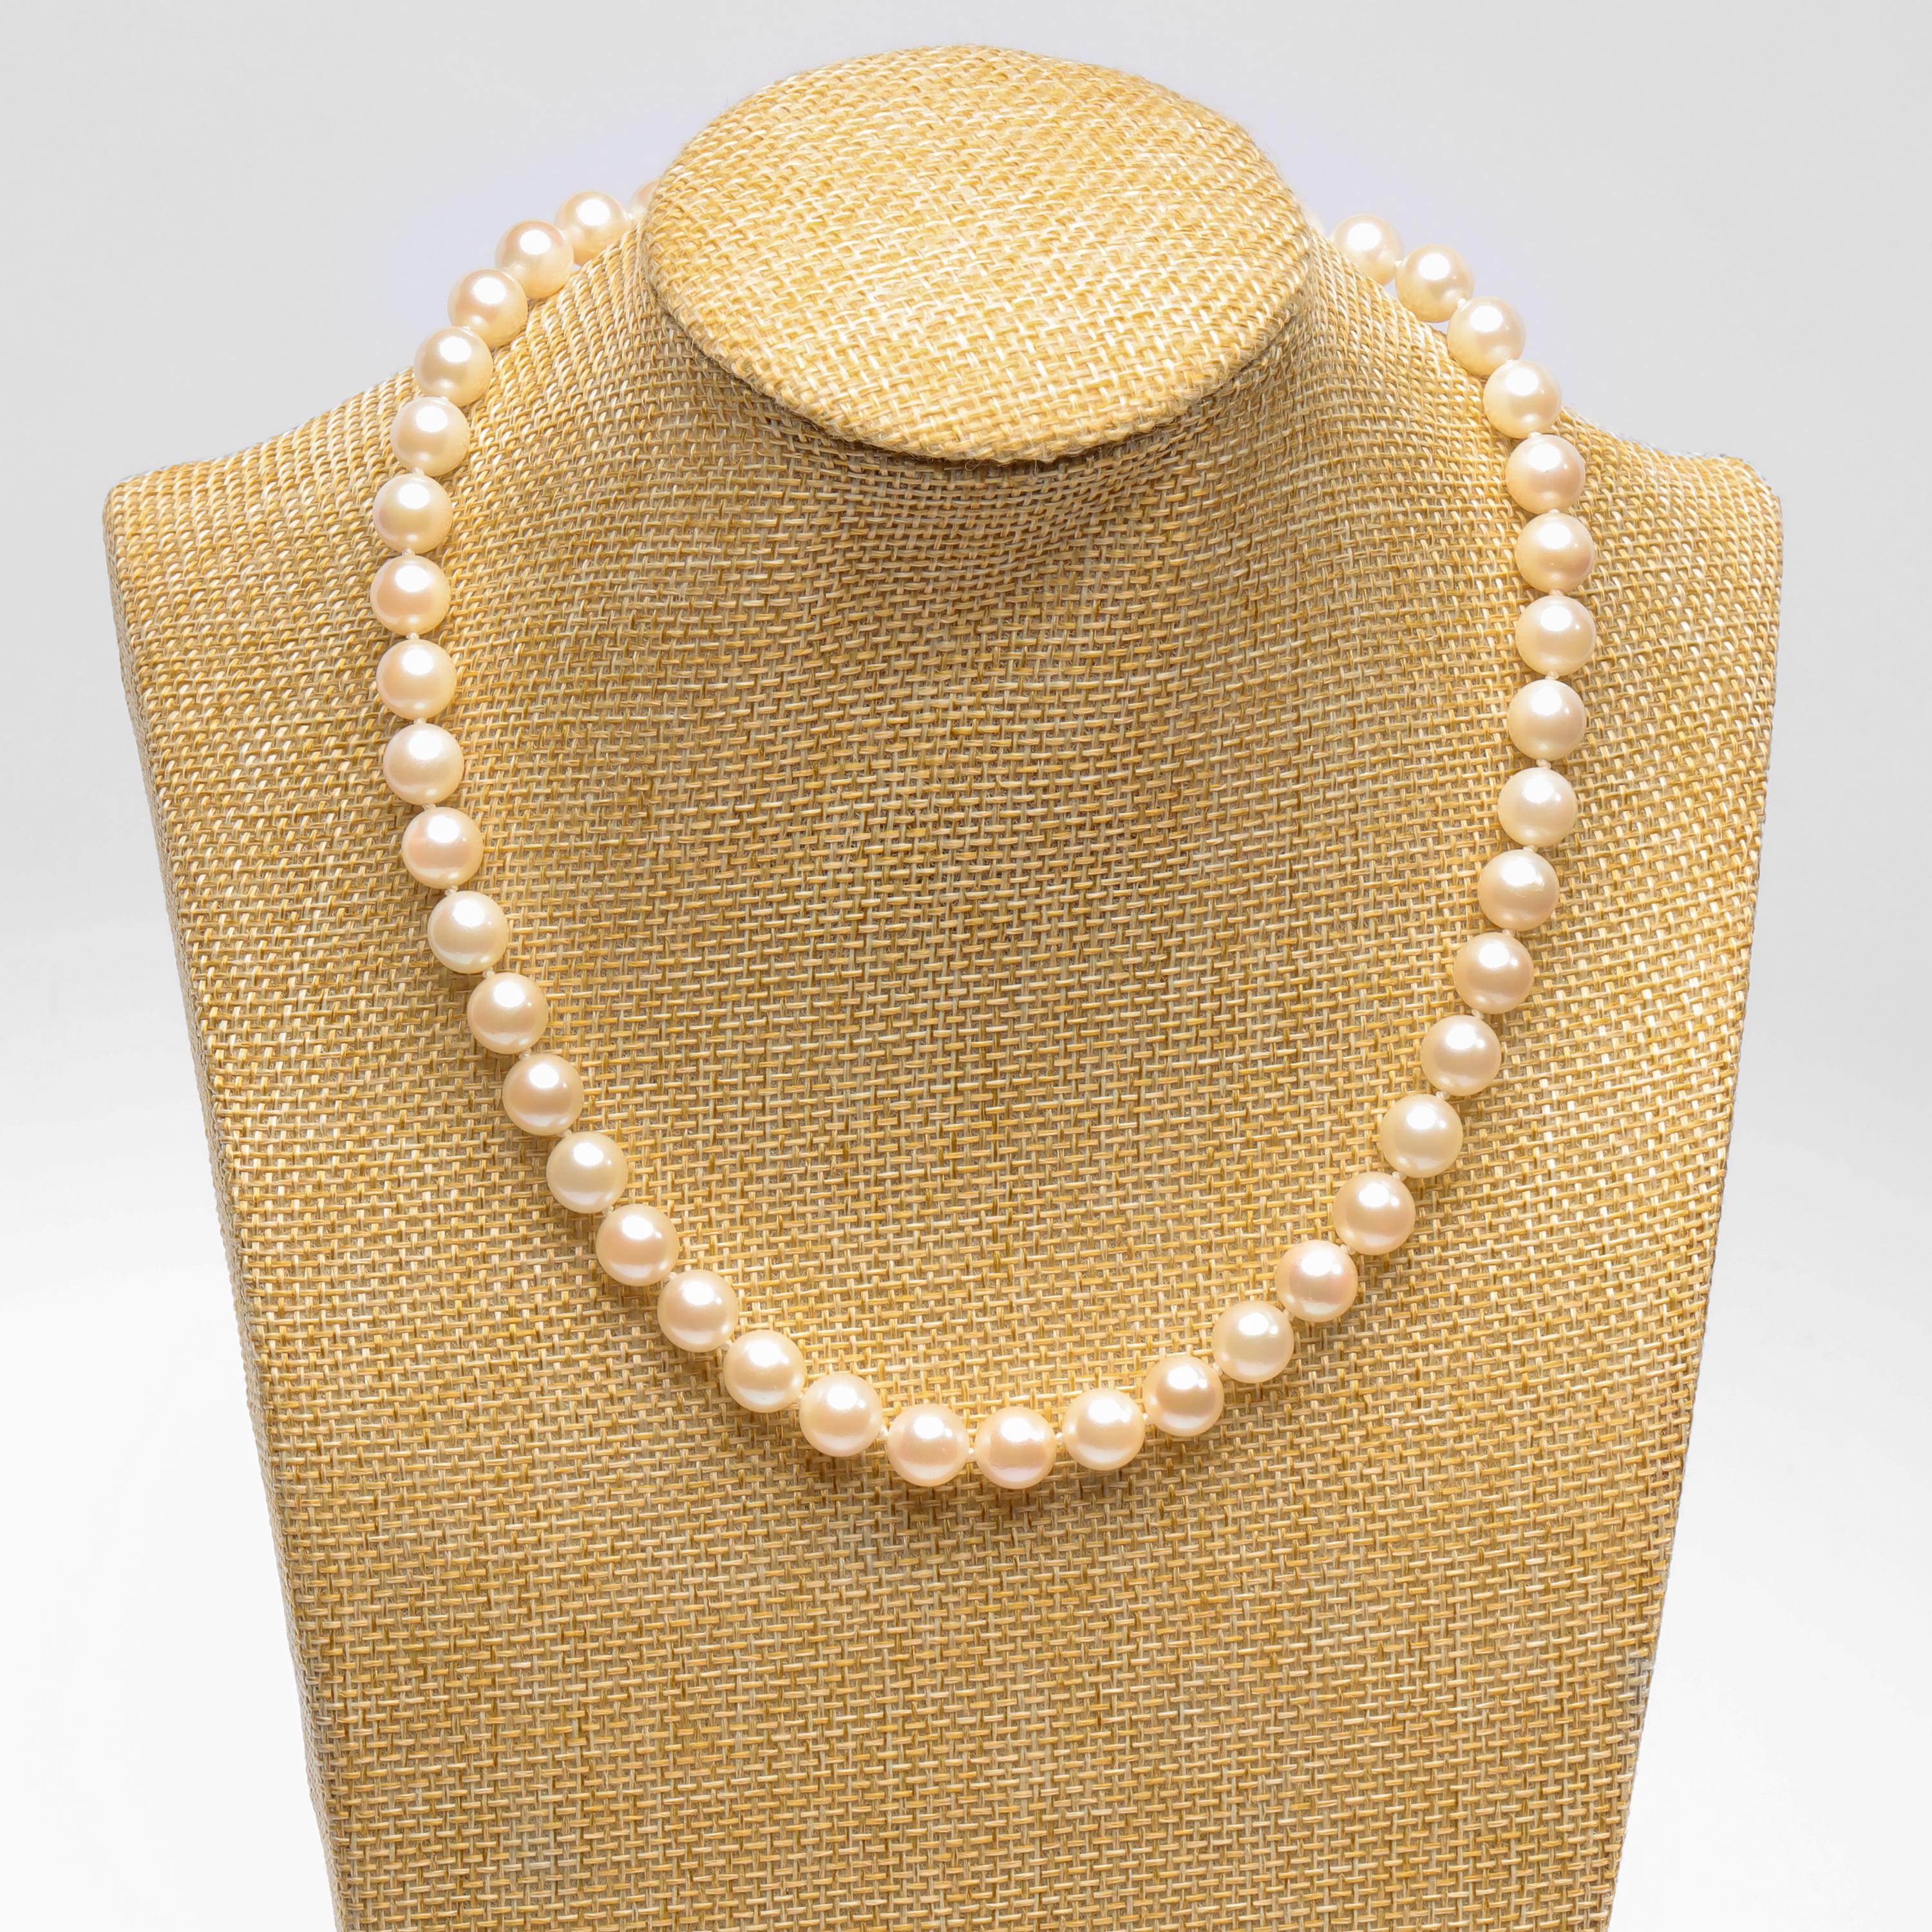 Bead Vintage Akoya Pearl Necklace circa 1950s Thick Nacre & Classic Elegance